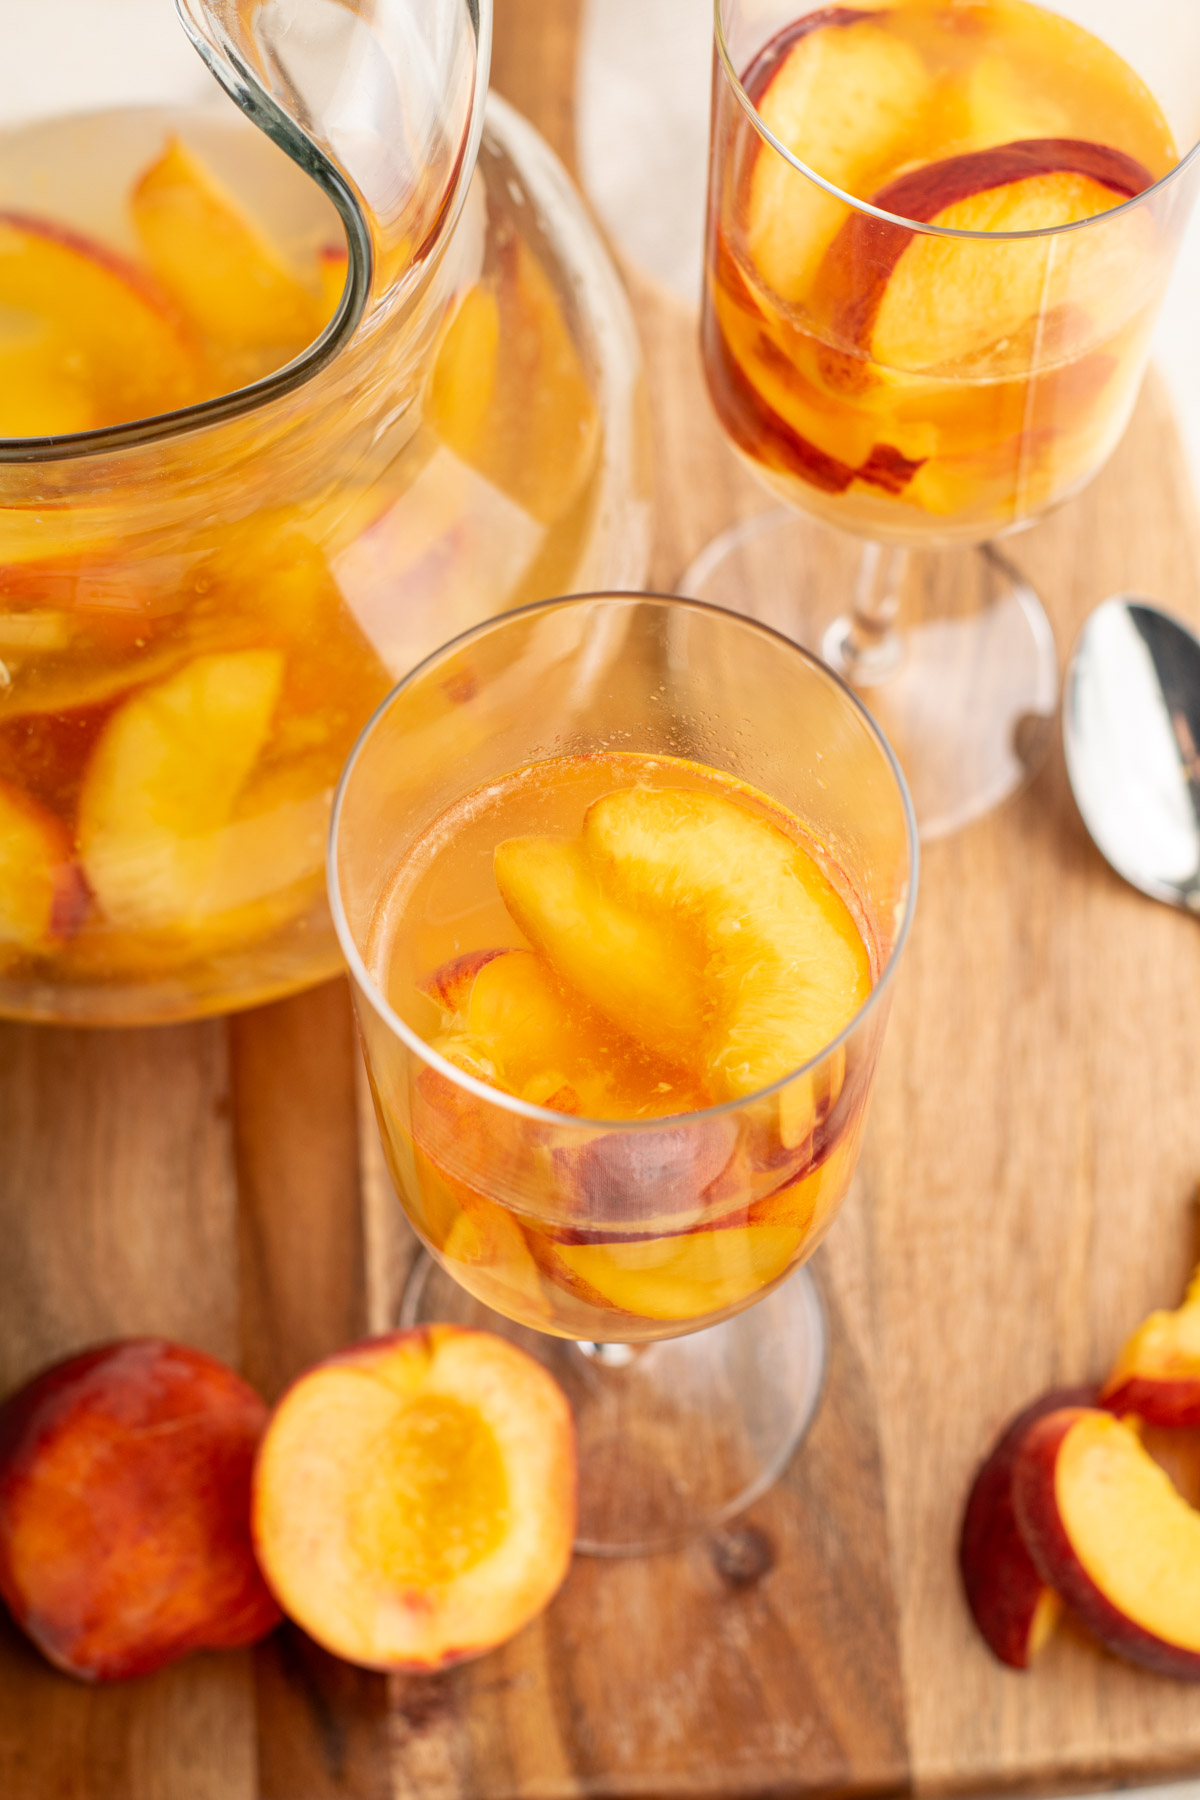 wine glasses with peaches and wine in them.